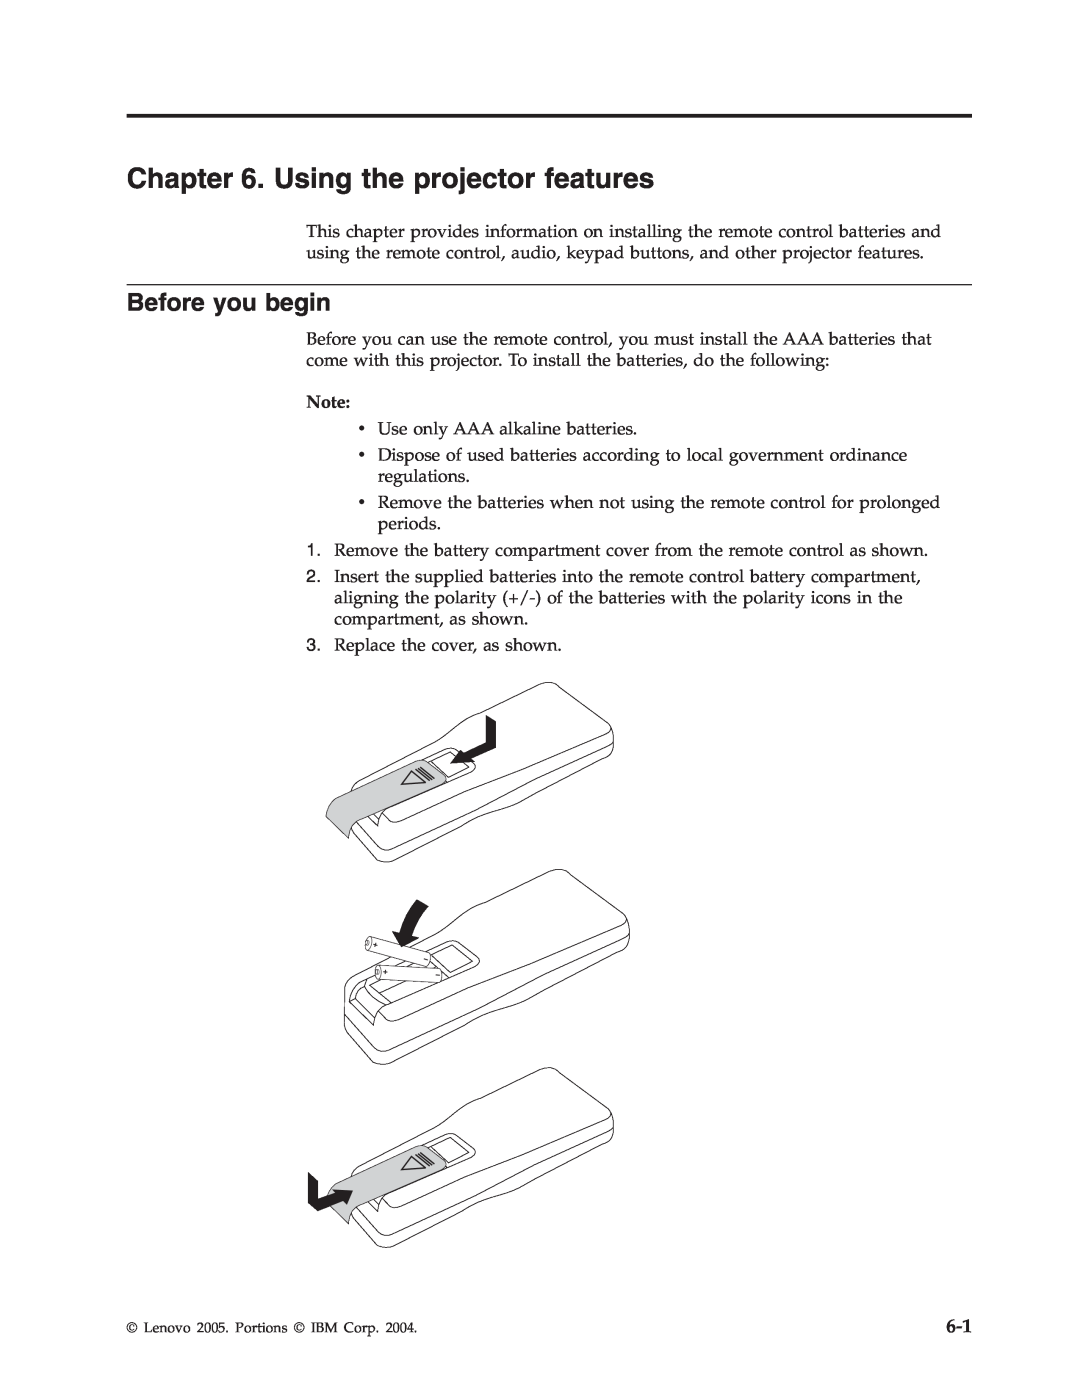 Lenovo C400 manual Using the projector features, Before you begin 